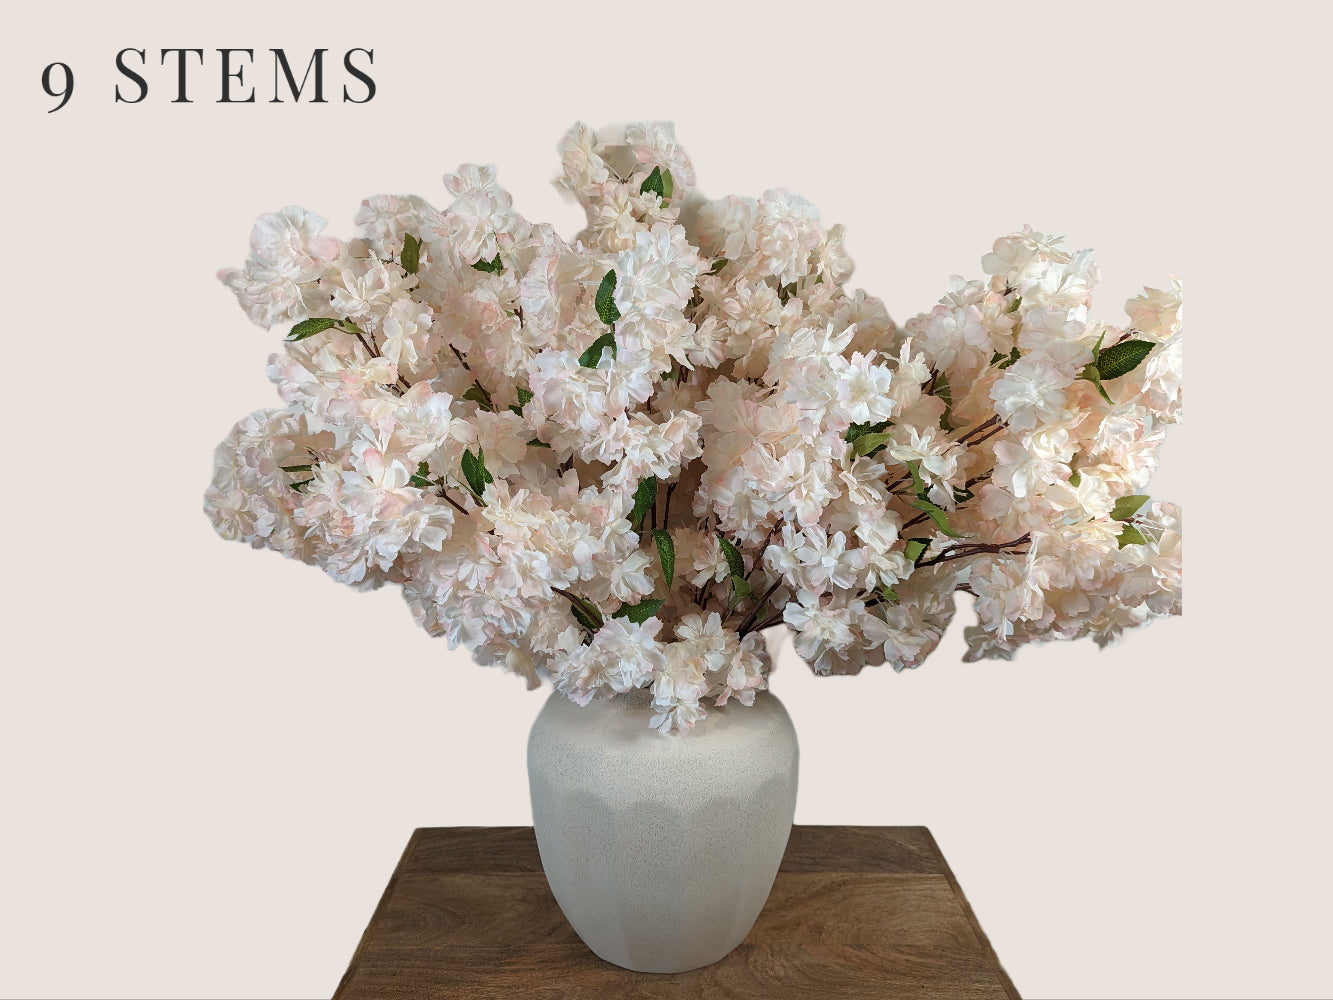 Artificial waterfall cherry blossom stems in soft pink and white, with a brown stem, each stem has 3 branches, with fully, big waterfall blossom blooms. The arrangement includes 9 branches and is displayed in a white vase. The overall height of the arrangement is 38 inches, with 16 inches of stem and 22 inches of branch/flower. The image is set against a neutral beige background.